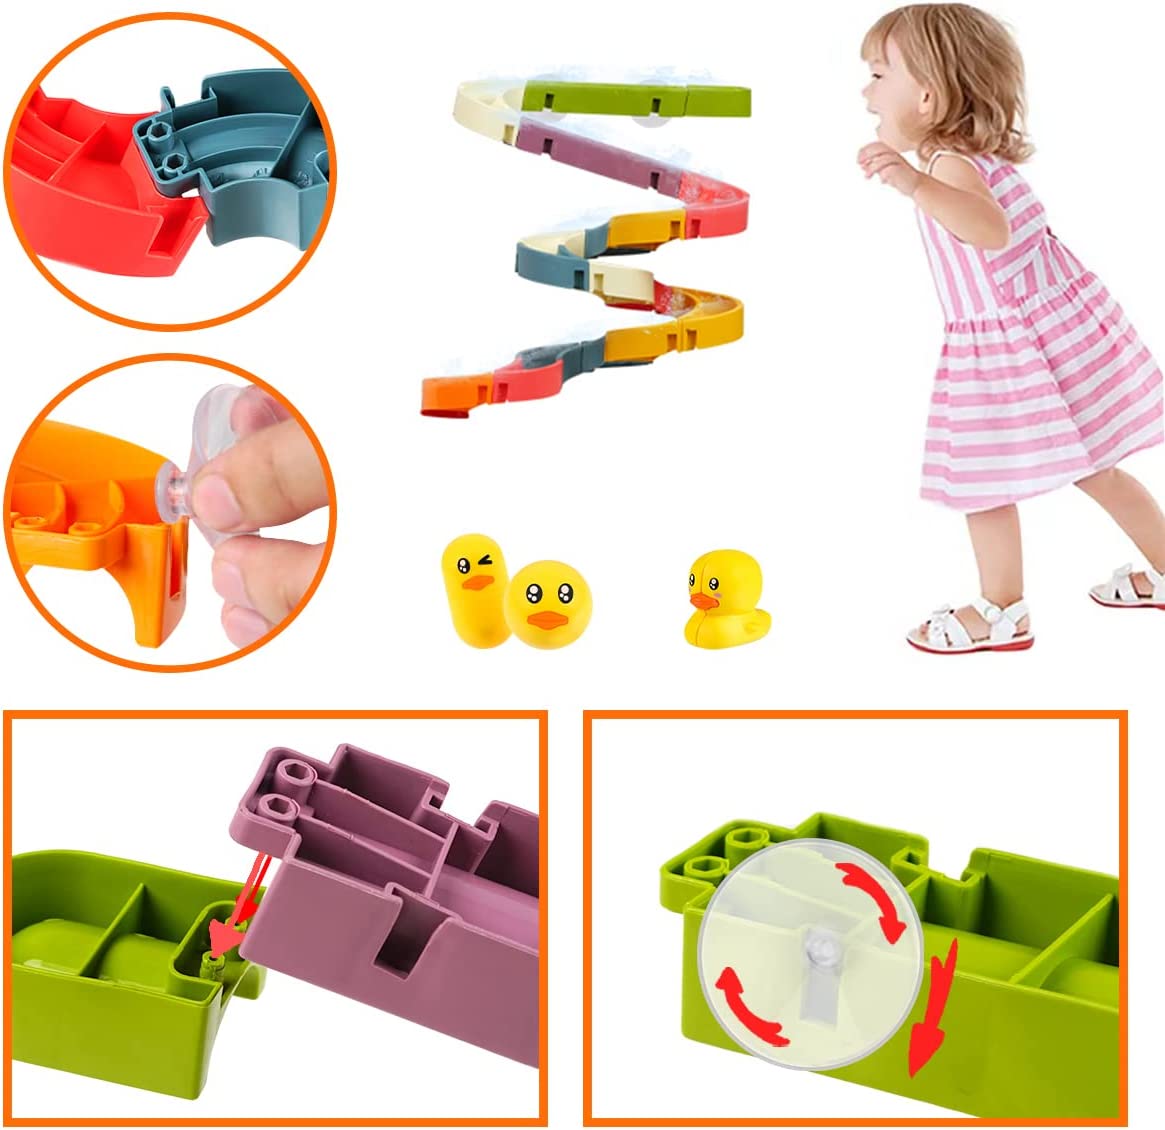 Duck Slide Bath Toys, Wall Track Building Set for Kids Ages 4-8